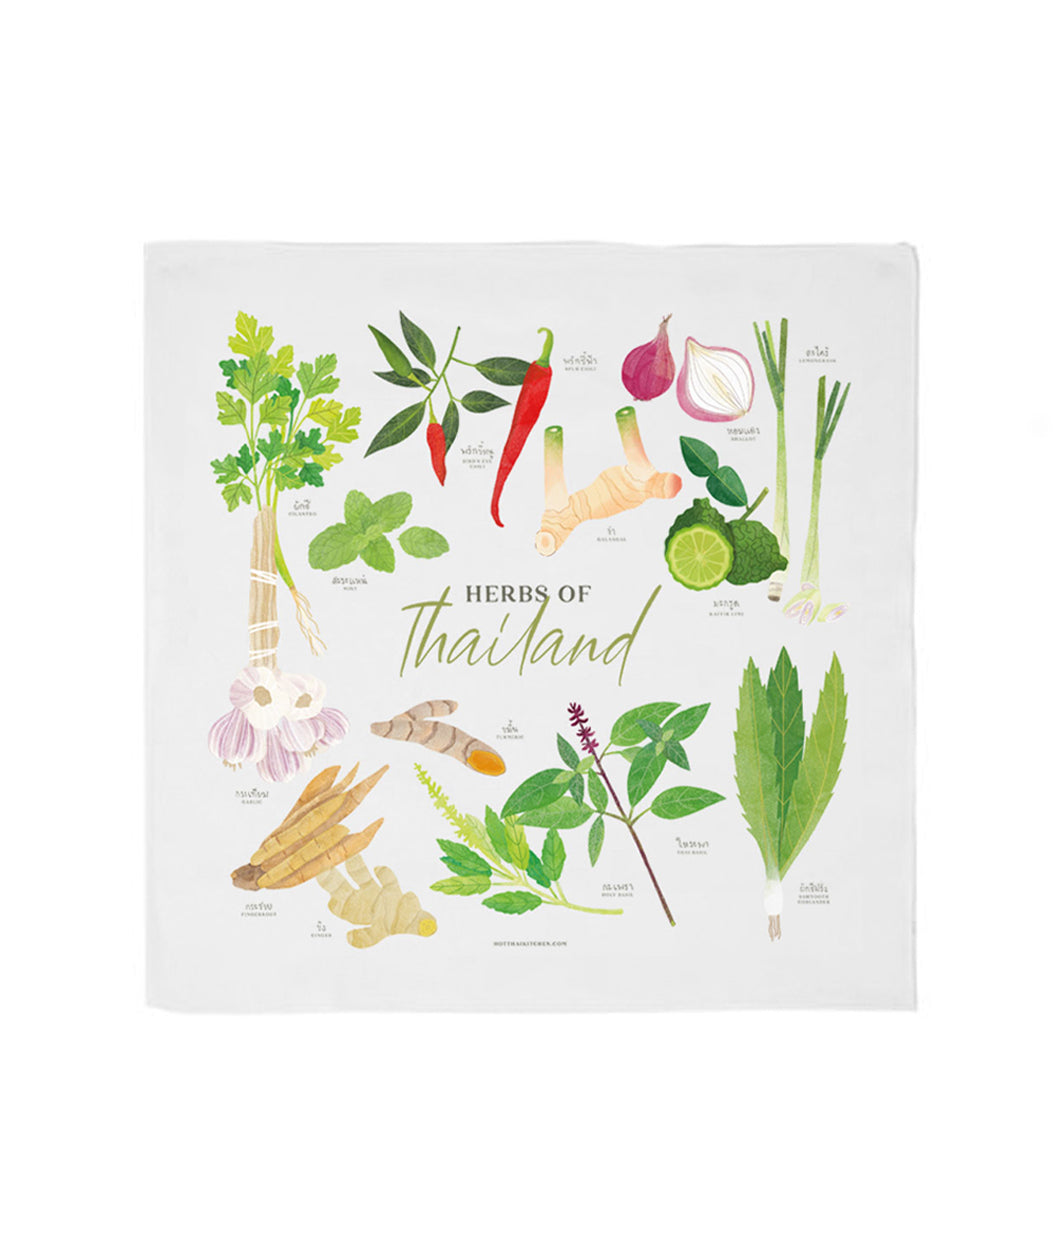 A tea towel from Hot Thai Kitchen showing colorful illustrations of different herbs of Thailand.